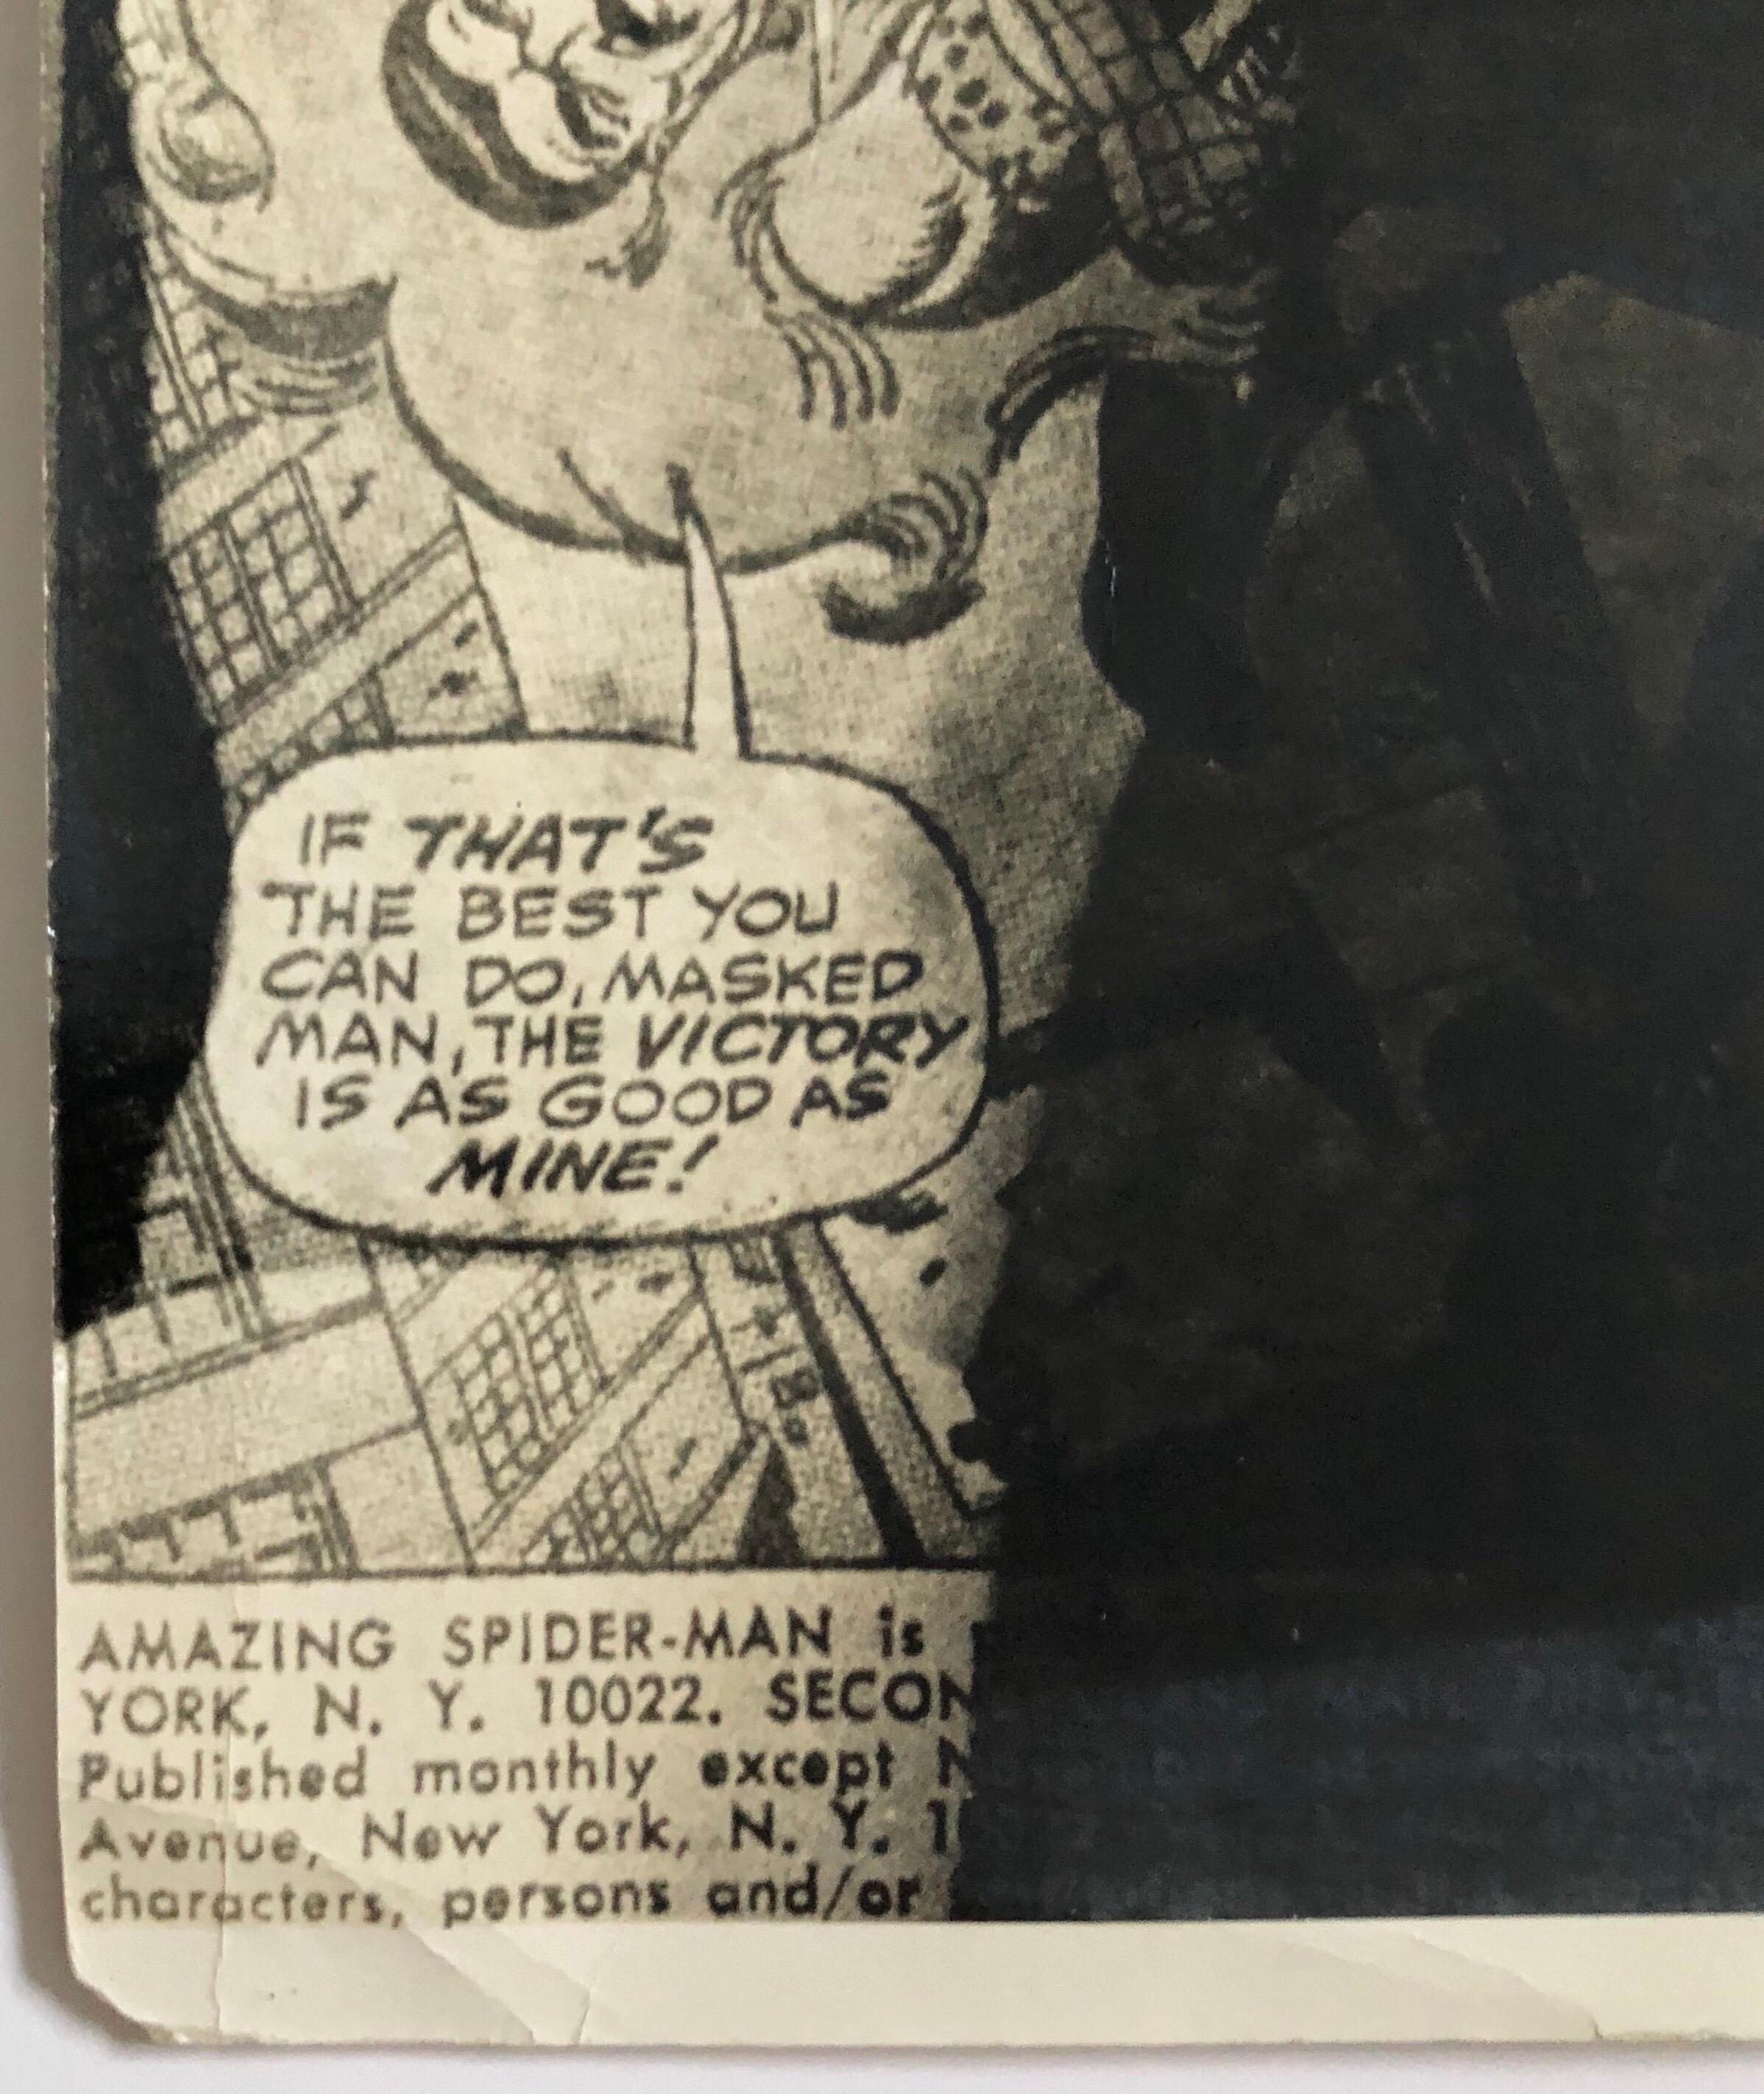 This is a vintage silver gelatin photo of either Stan Lee or John Romita (I believe it is Romita but I am not sure) overlayed with a comic strip in a surrealist style.

John Romita is an American comic-book artist best known for his work on Marvel